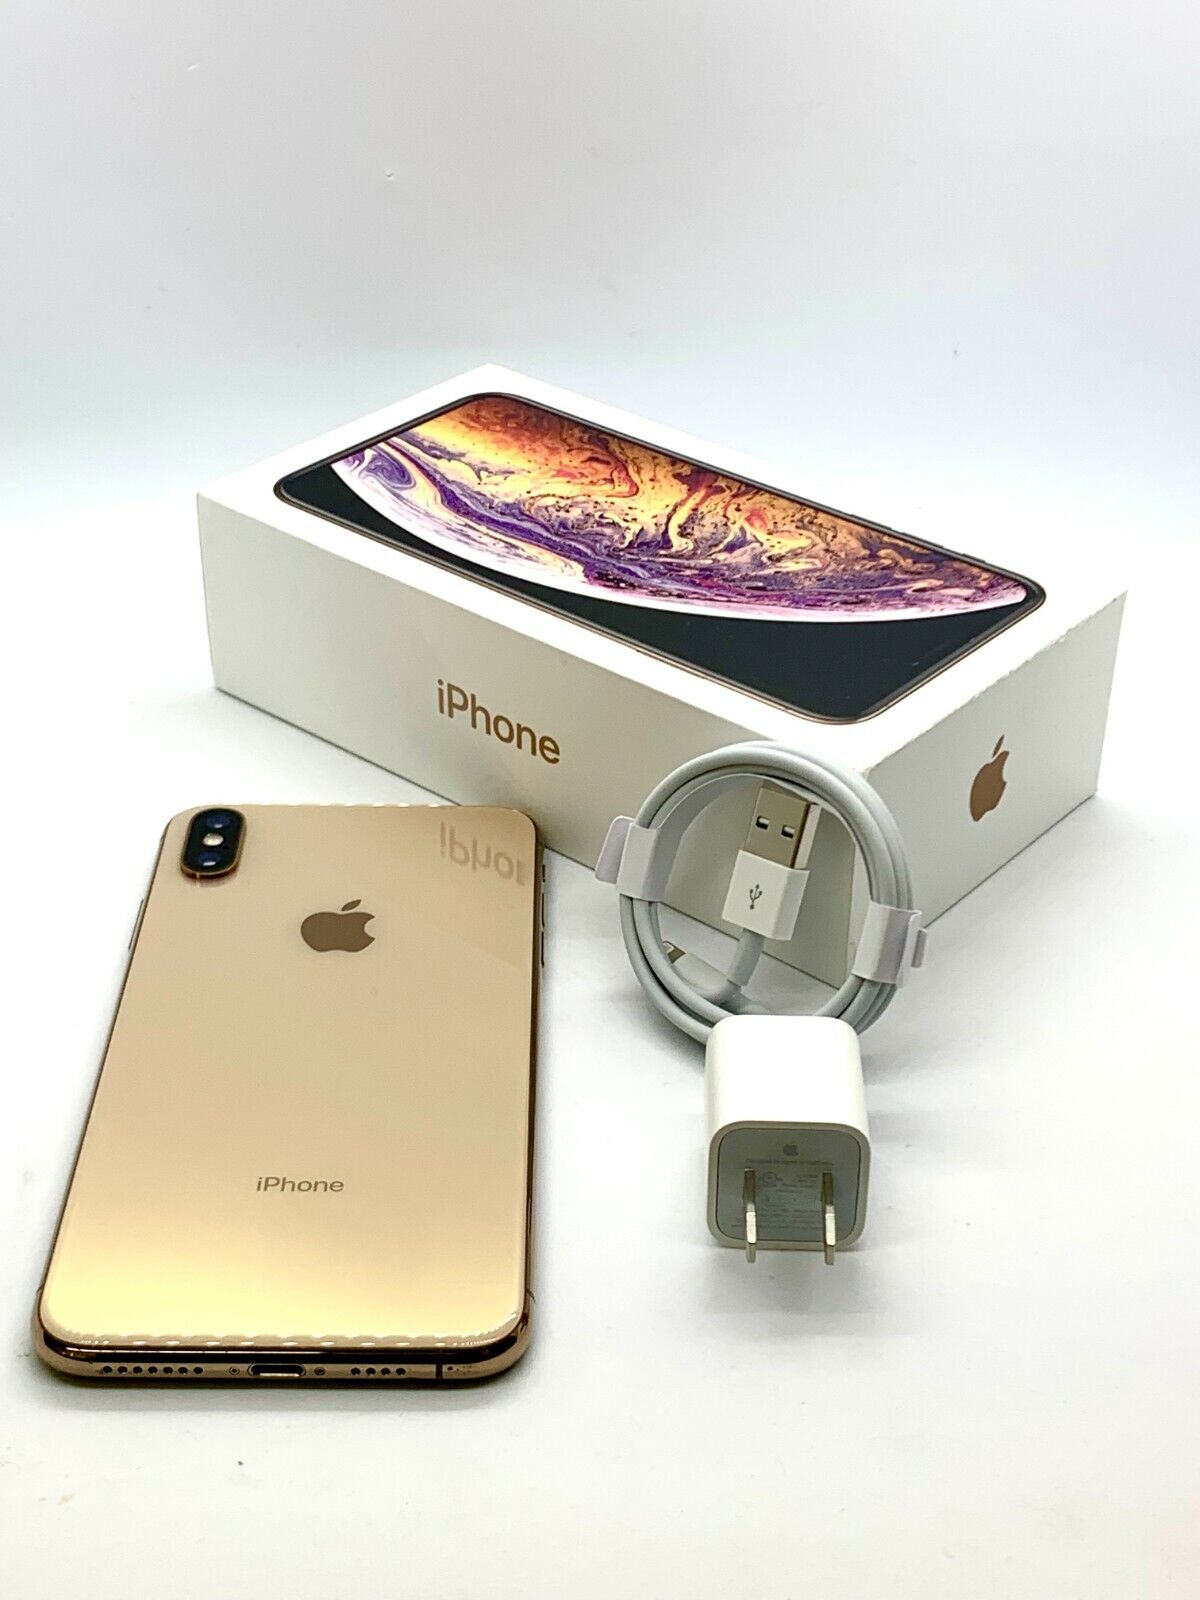 Apple iPhone Xs Max 256GB Fully Unlocked Smartphone Space Gray Gold  Silver eBay